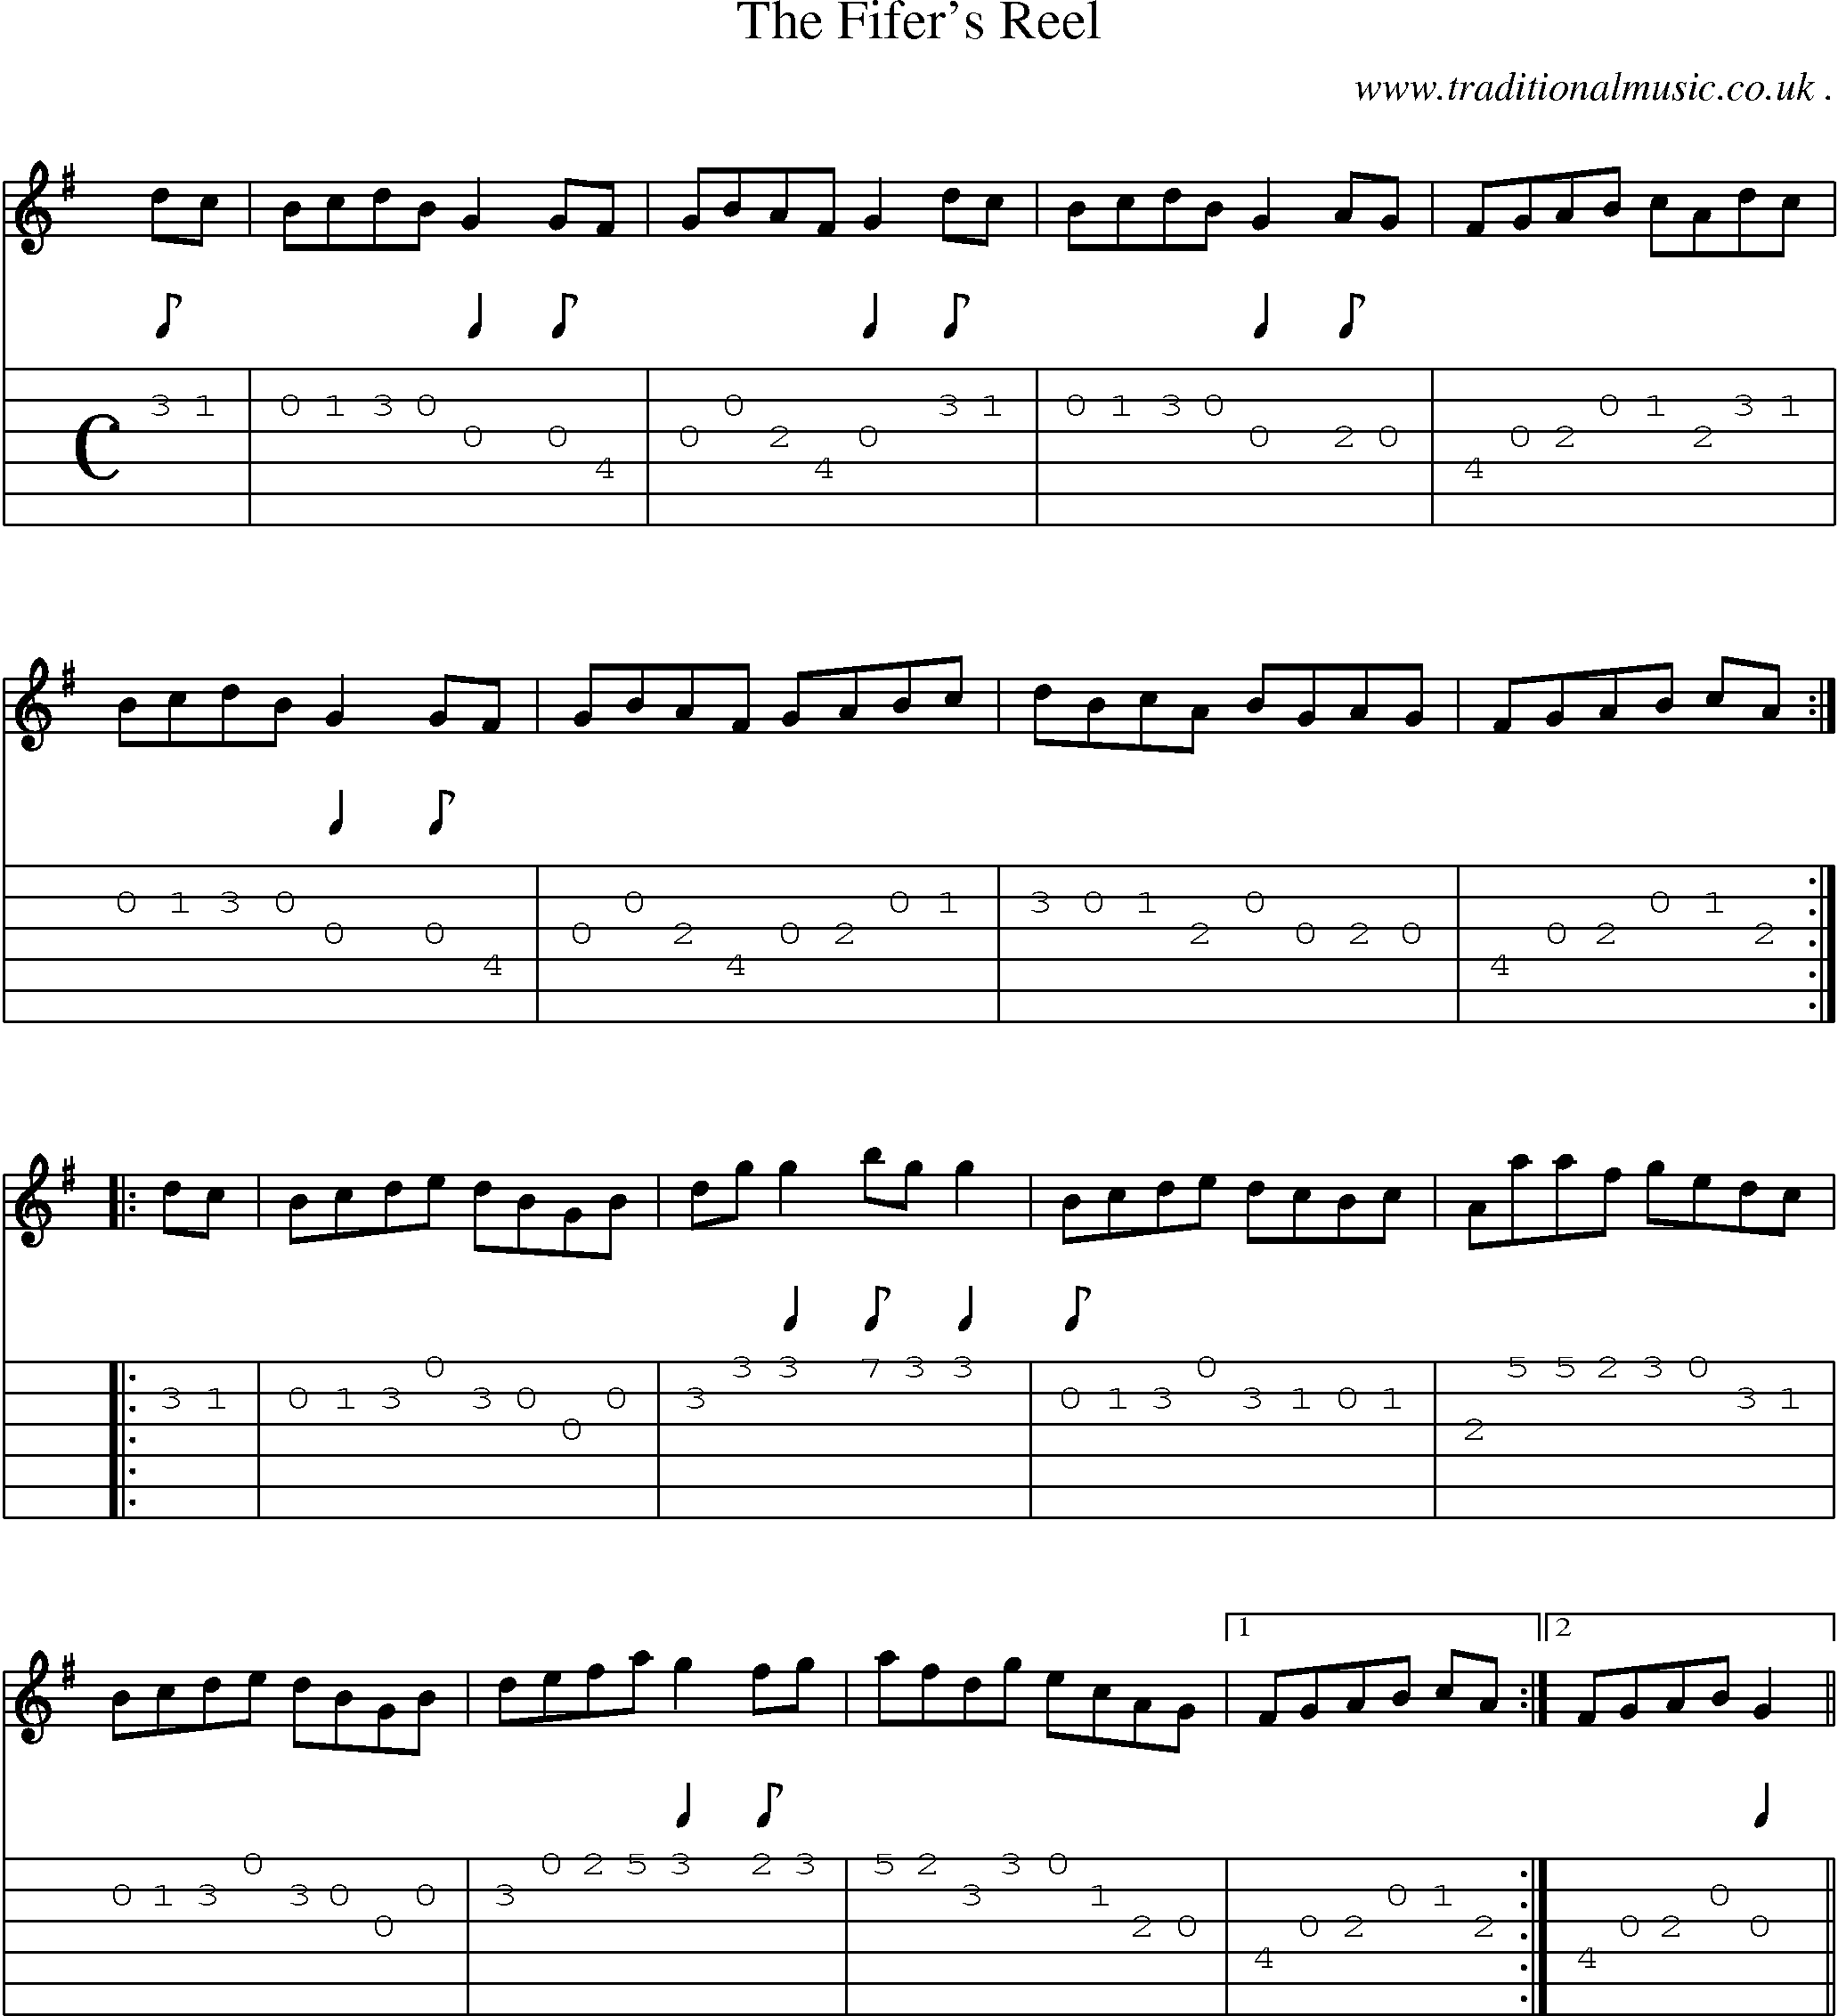 Sheet-Music and Guitar Tabs for The Fifers Reel